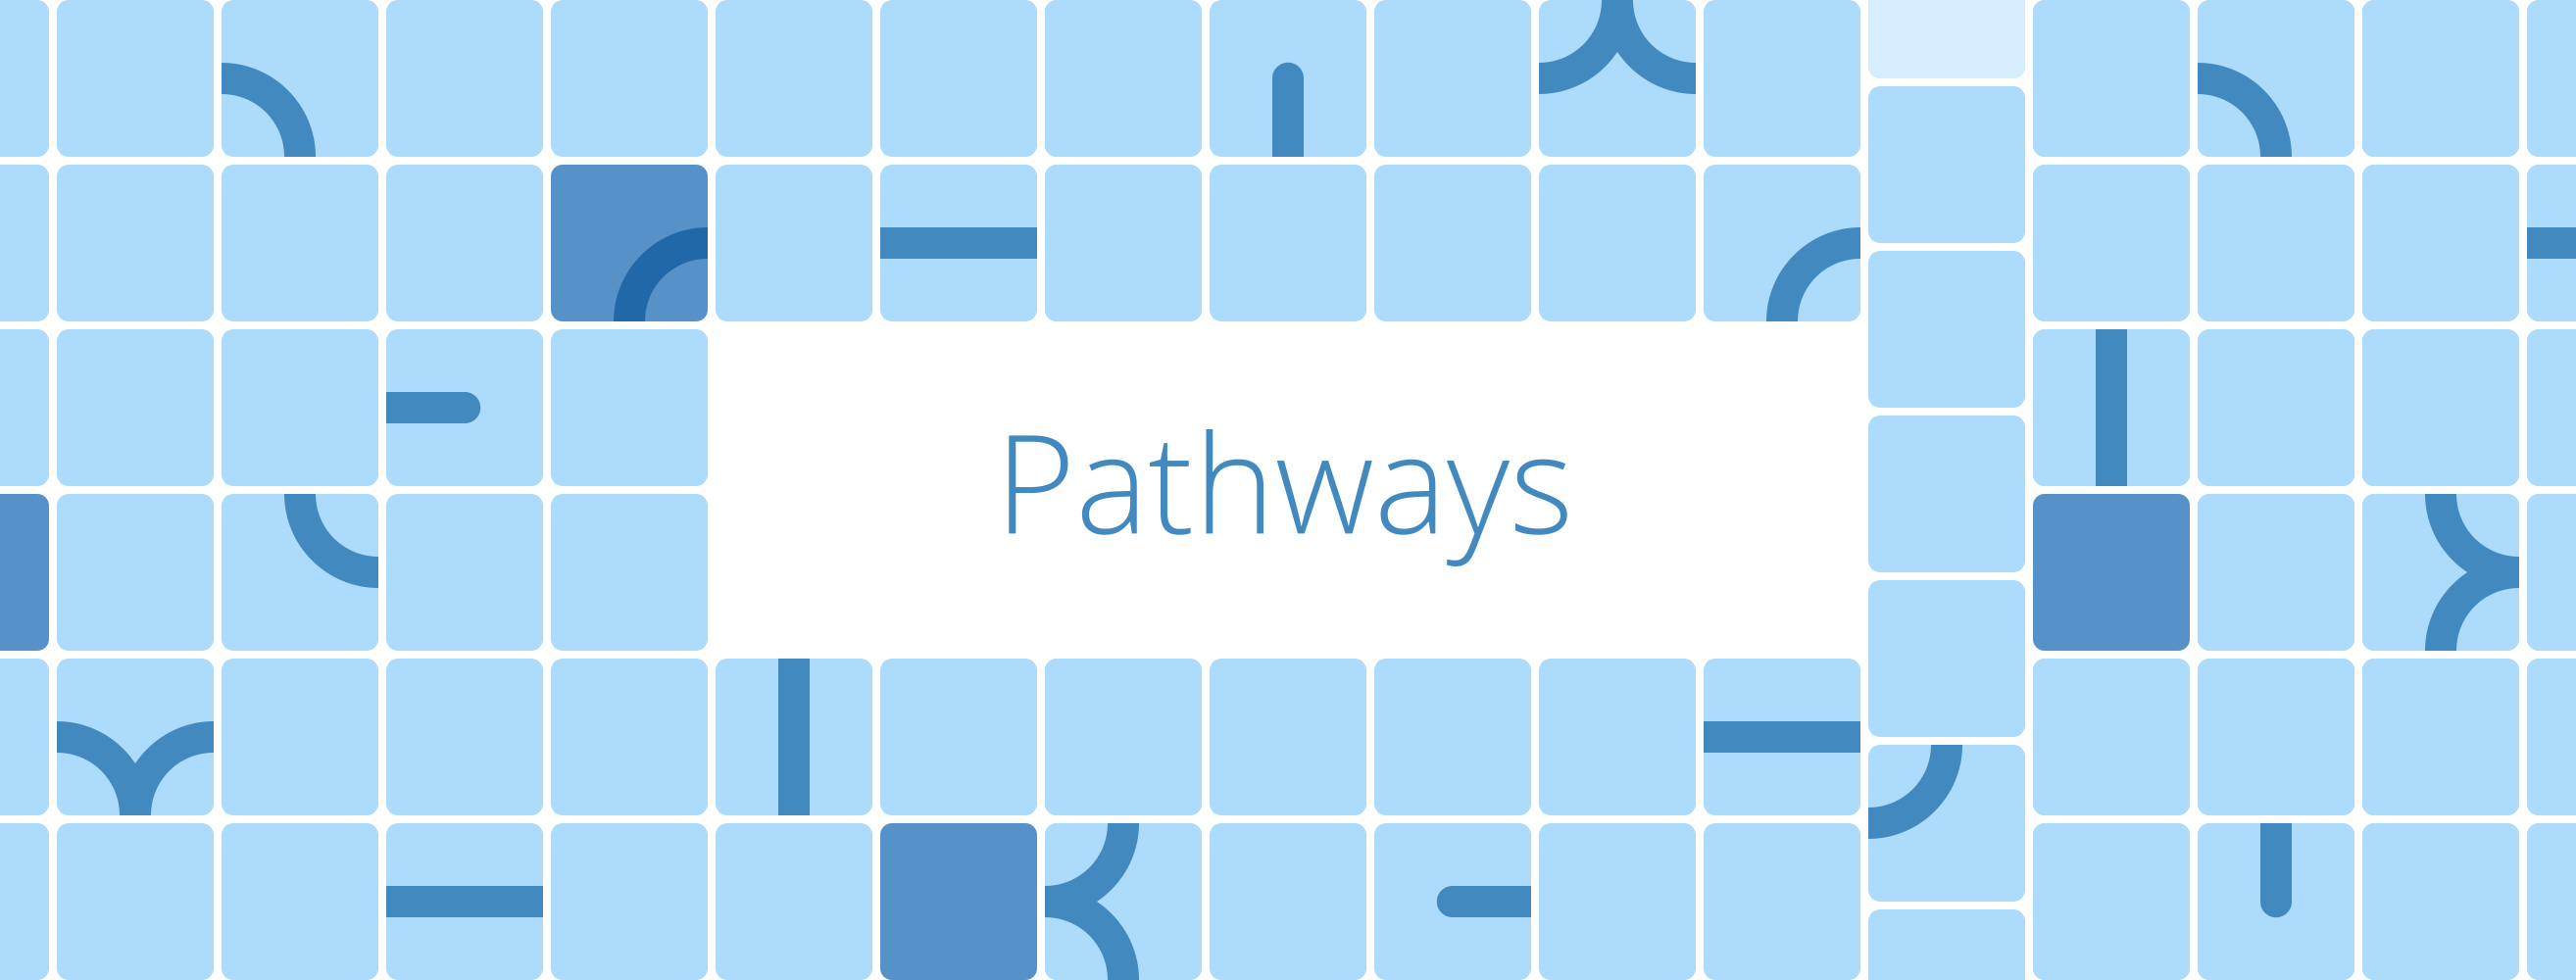 Pathway for apple download free